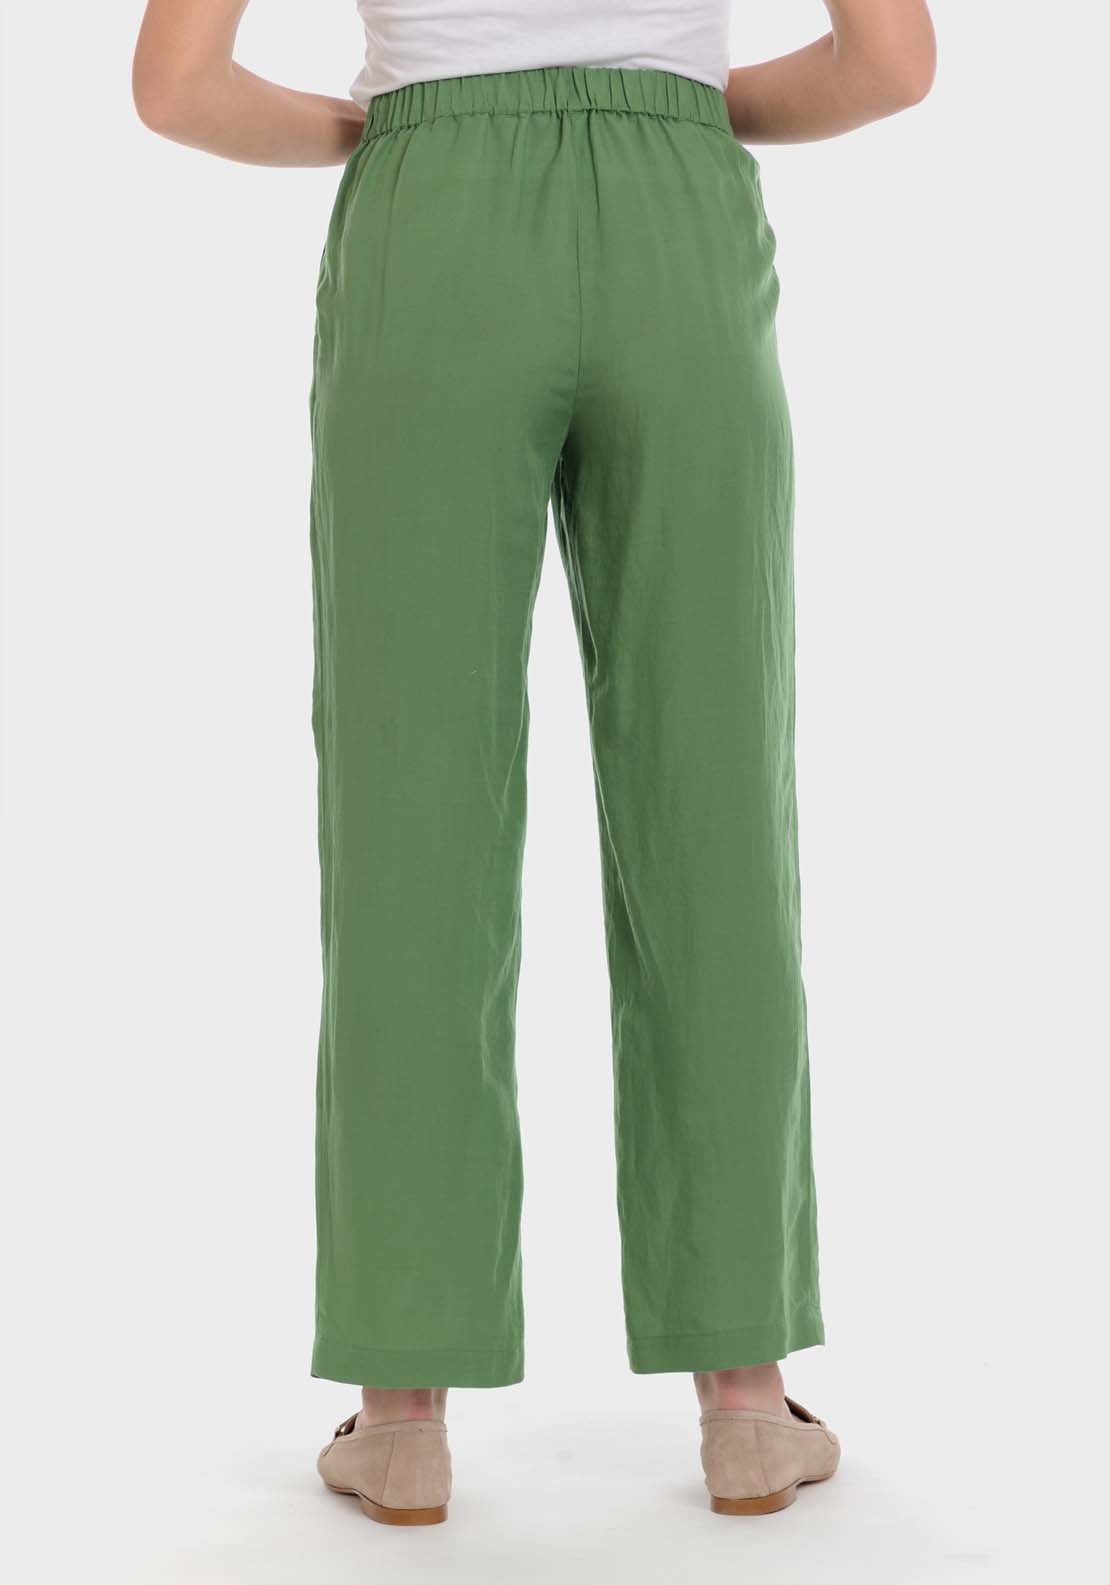 Punt Roma Linen Trousers - Green 3 Shaws Department Stores